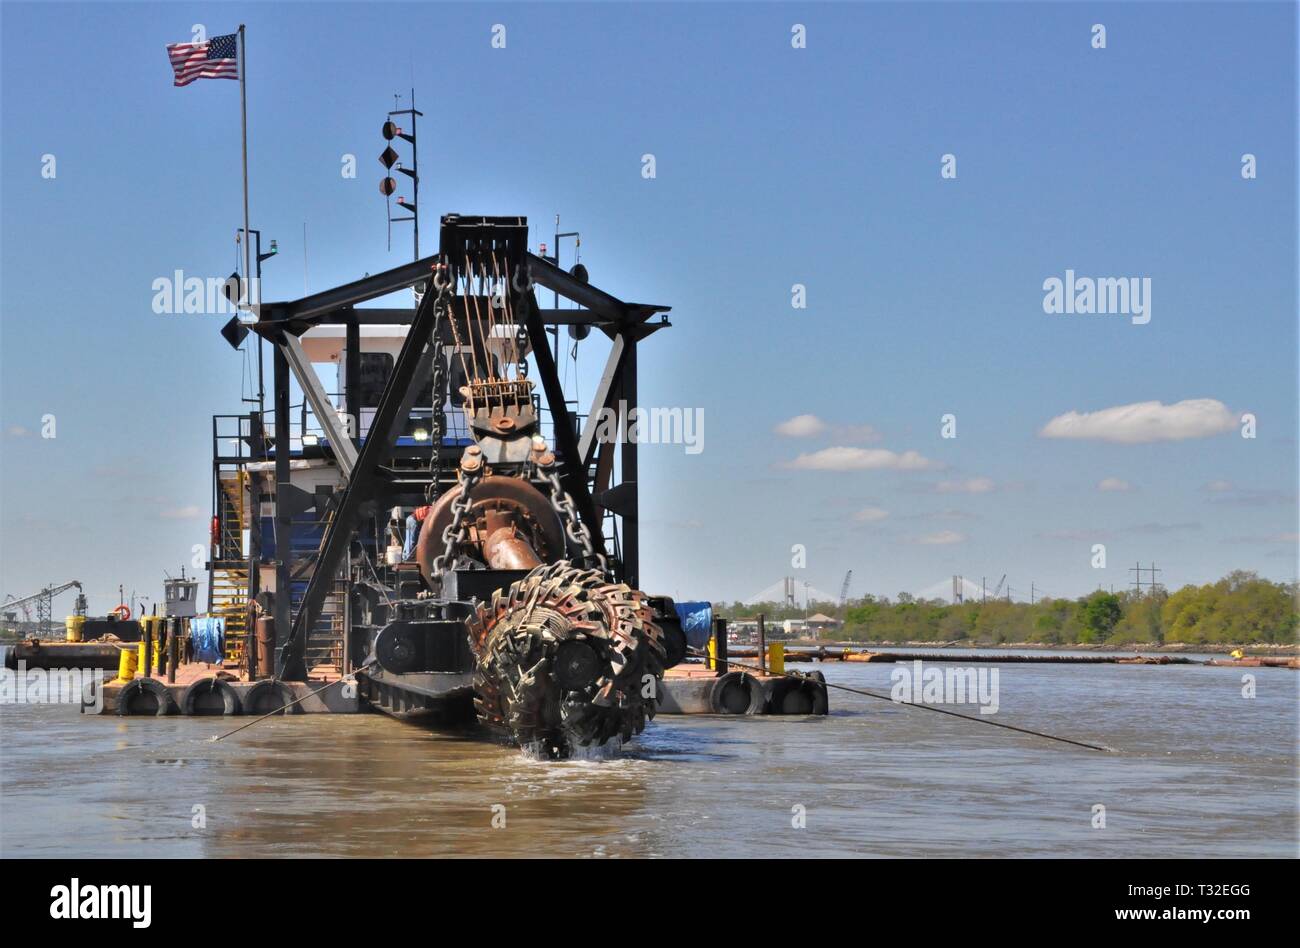 The dredge Hampton Roads raises its cutter head for maintenance during Savannah River maintenance dredging operations overseen by the U.S. Army Corps of Engineers, Savannah District. Stock Photo